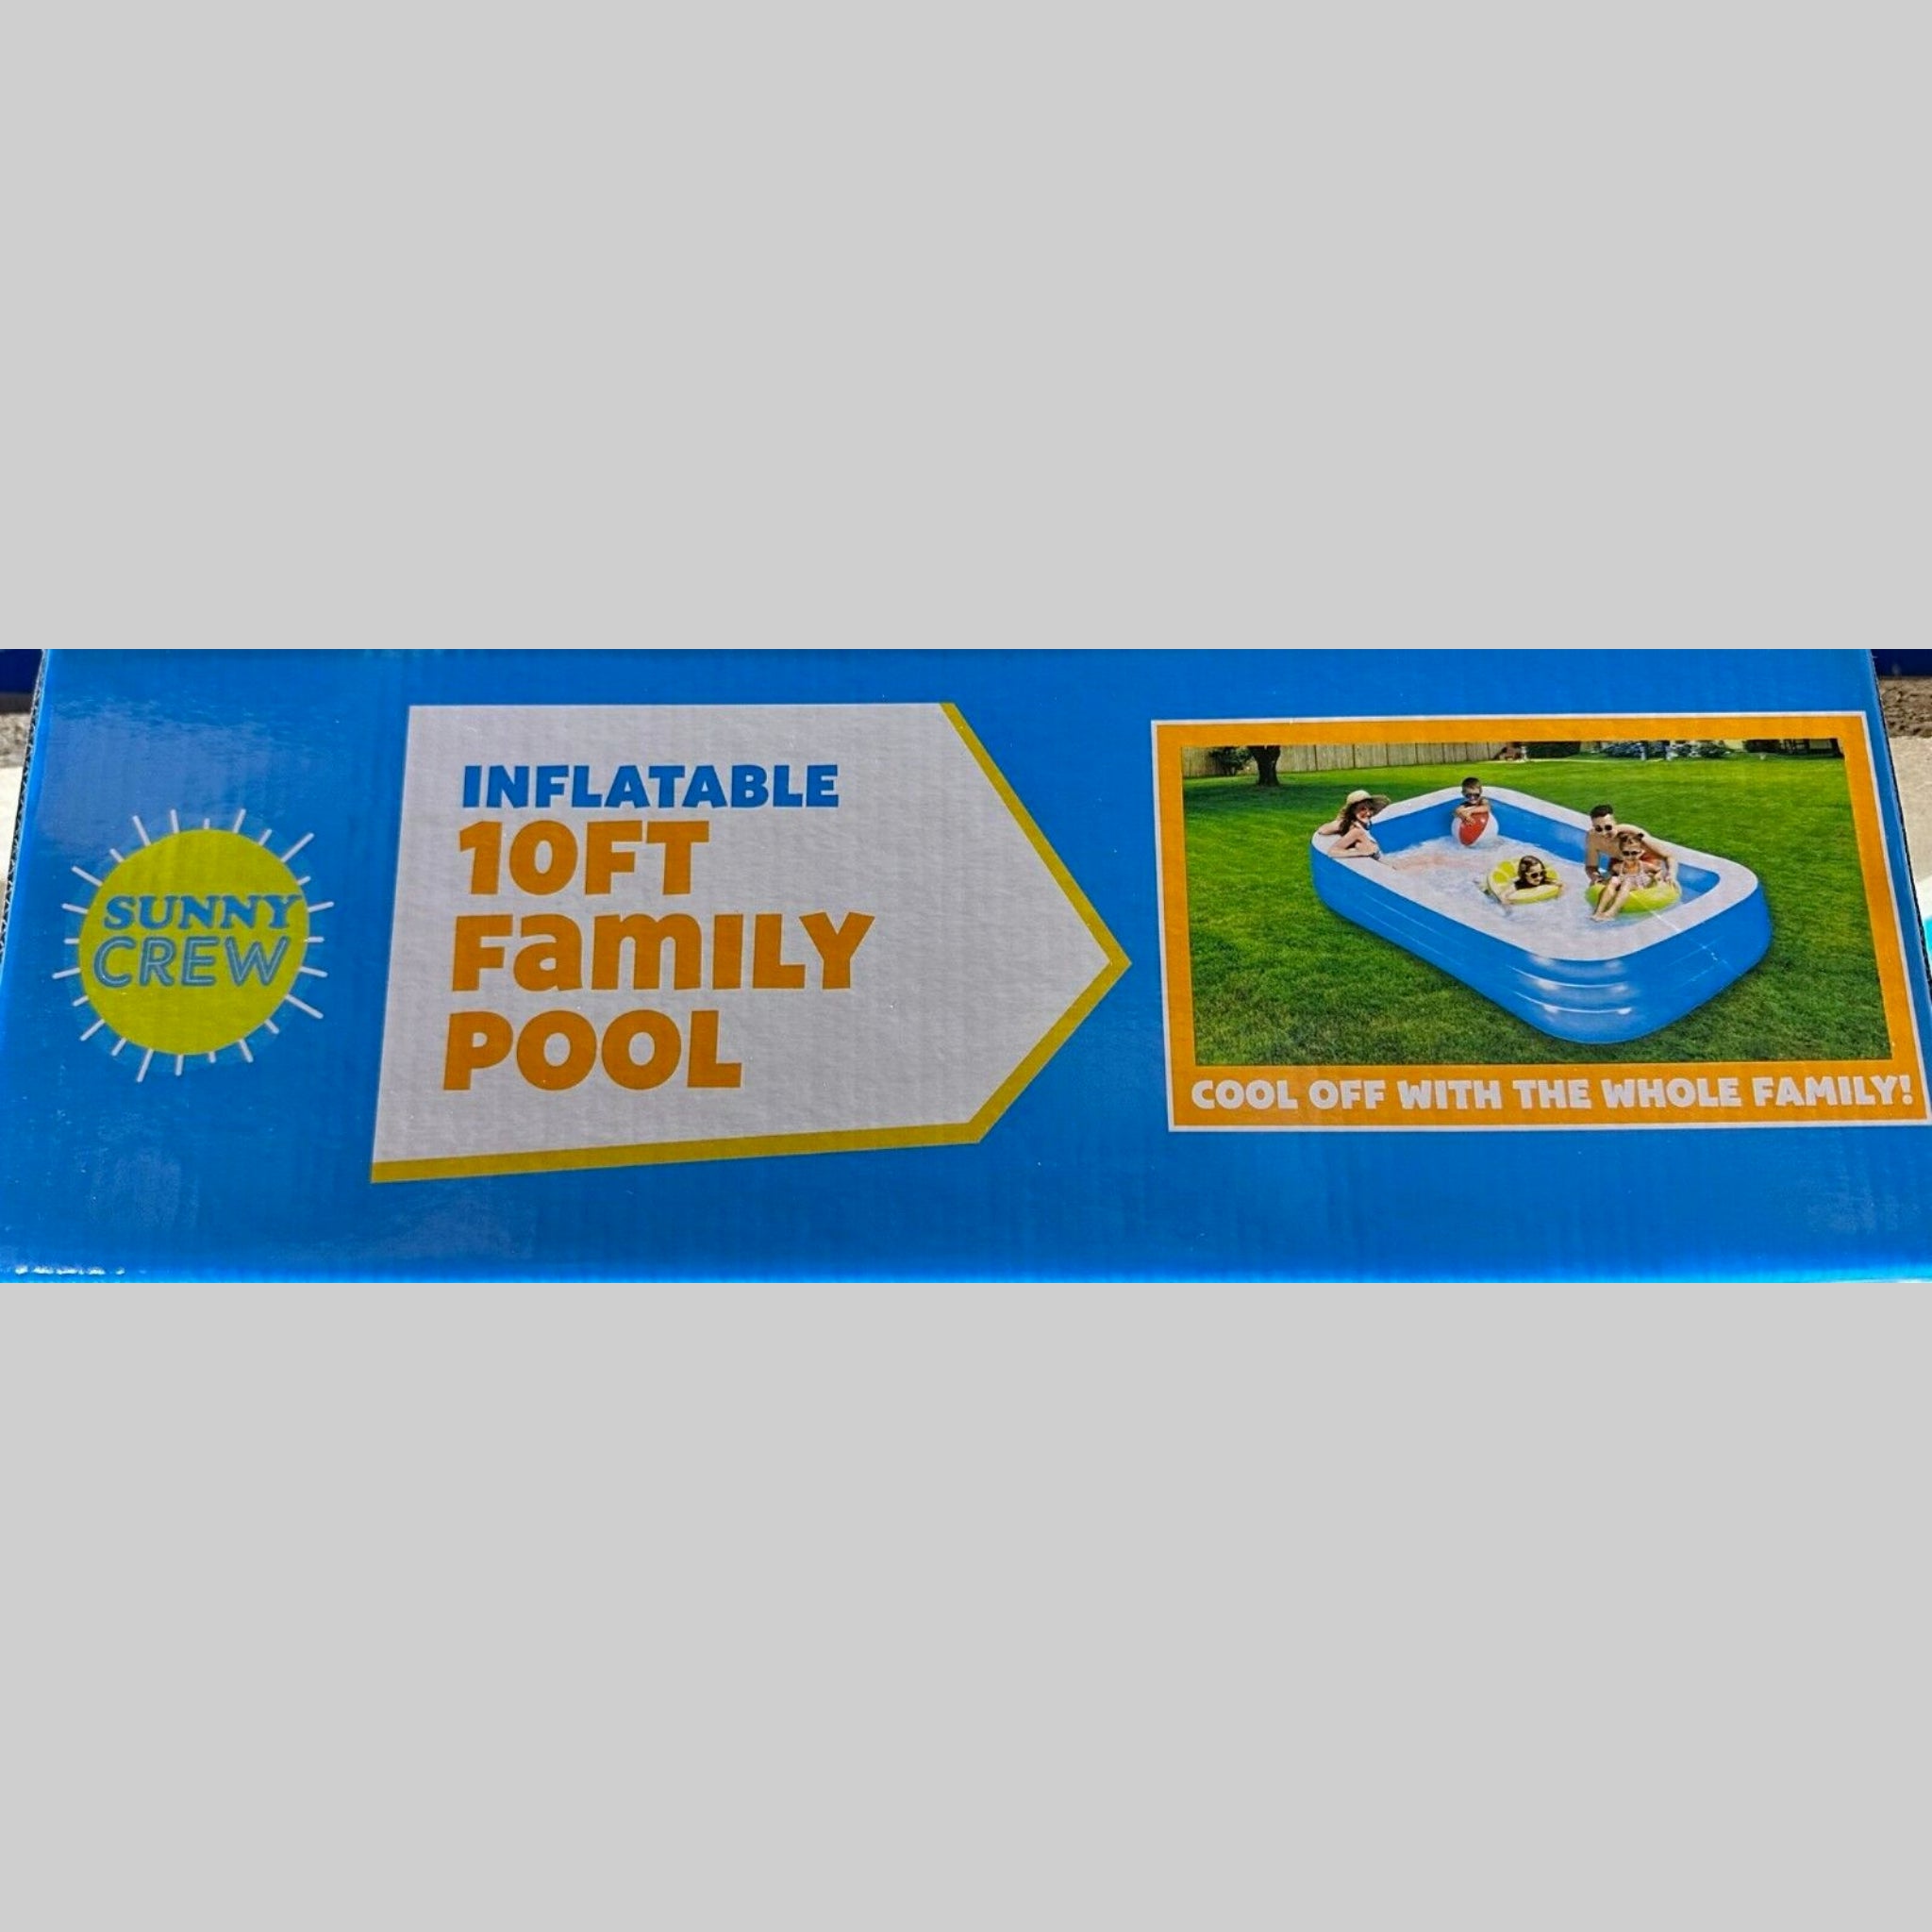 Beclen Harp Giant Inflatable Rectangular Paddling Swimming Pool For Summer/Outdoor Family Fun/Relax